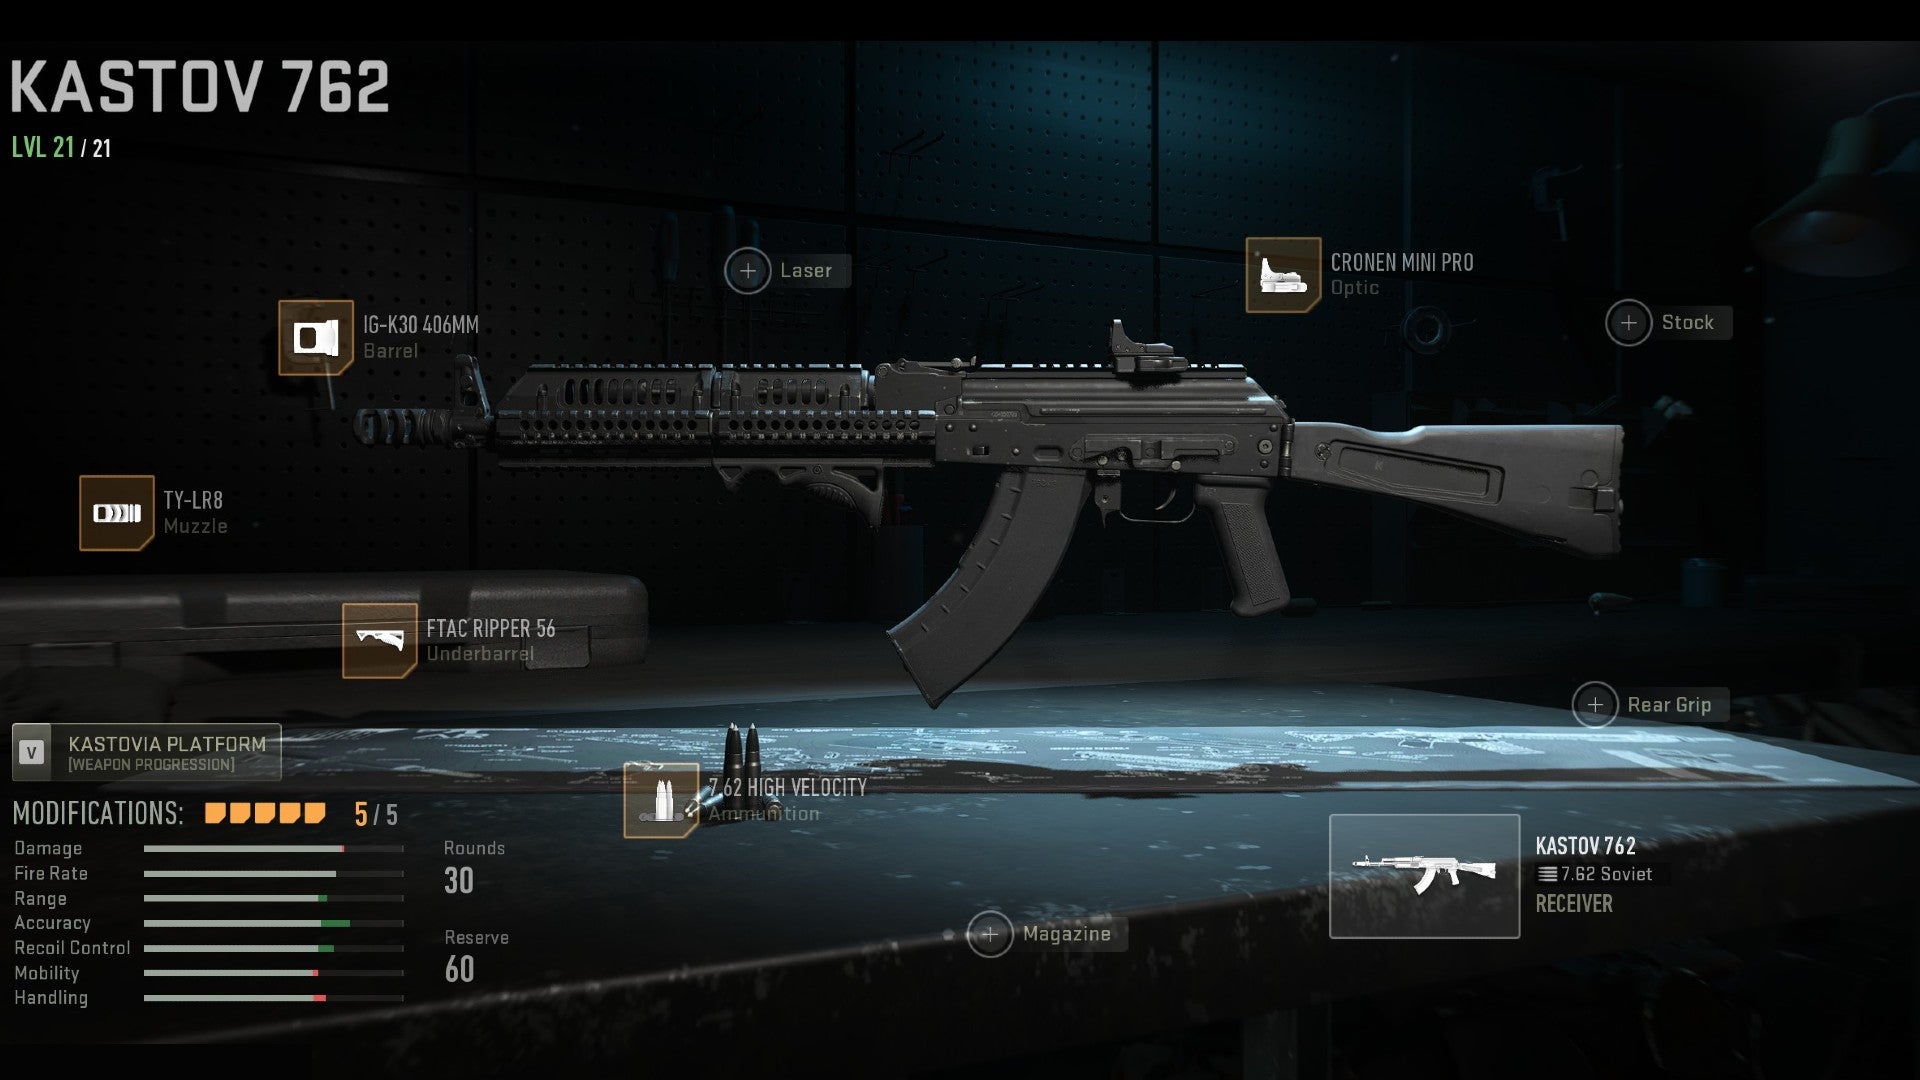 Warzone 2 screenshot showing the Kastov 762 with the TY-LR8, IG-K30 406mm, FTAC Ripper 56, 7.62 High Velocity Ammo, and Cronen Mini Pro equipped.